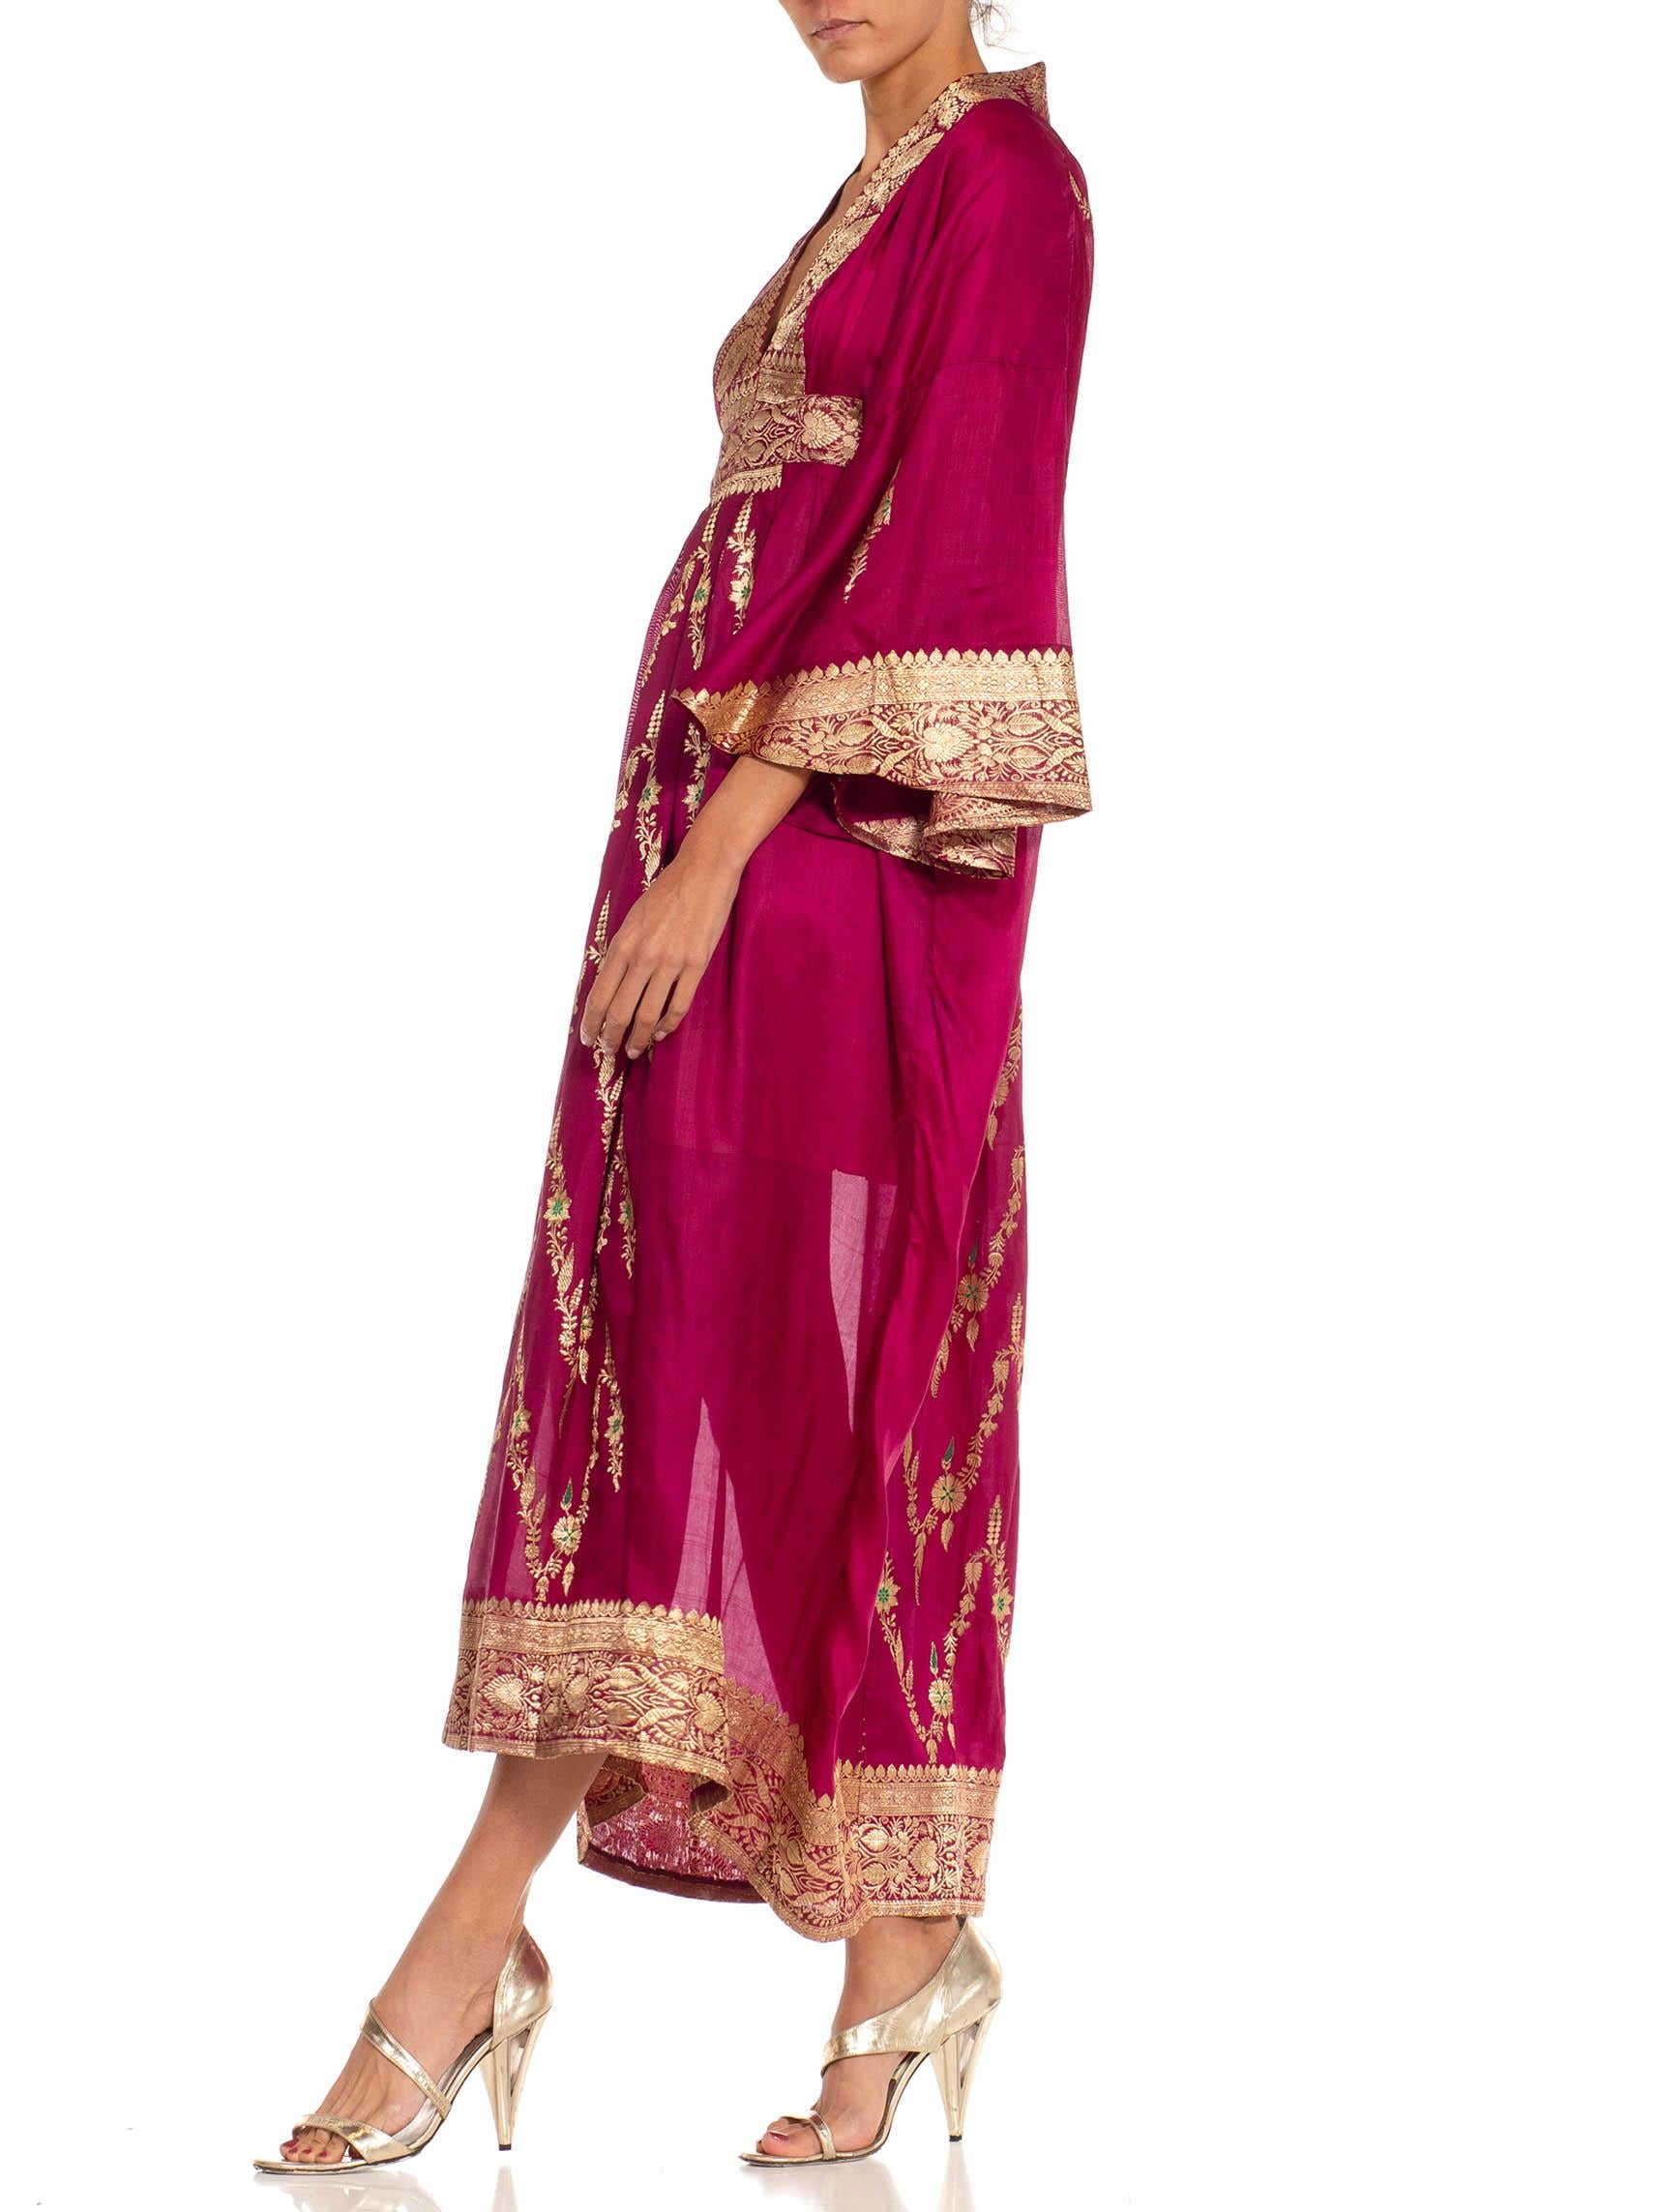 Morphew Collection Fuchsia & Gold Silk Kaftan Made From Vintage Saris
MORPHEW COLLECTION is made entirely by hand in our NYC Ateliér of rare antique materials sourced from around the globe. Our sustainable vintage materials represent over a century